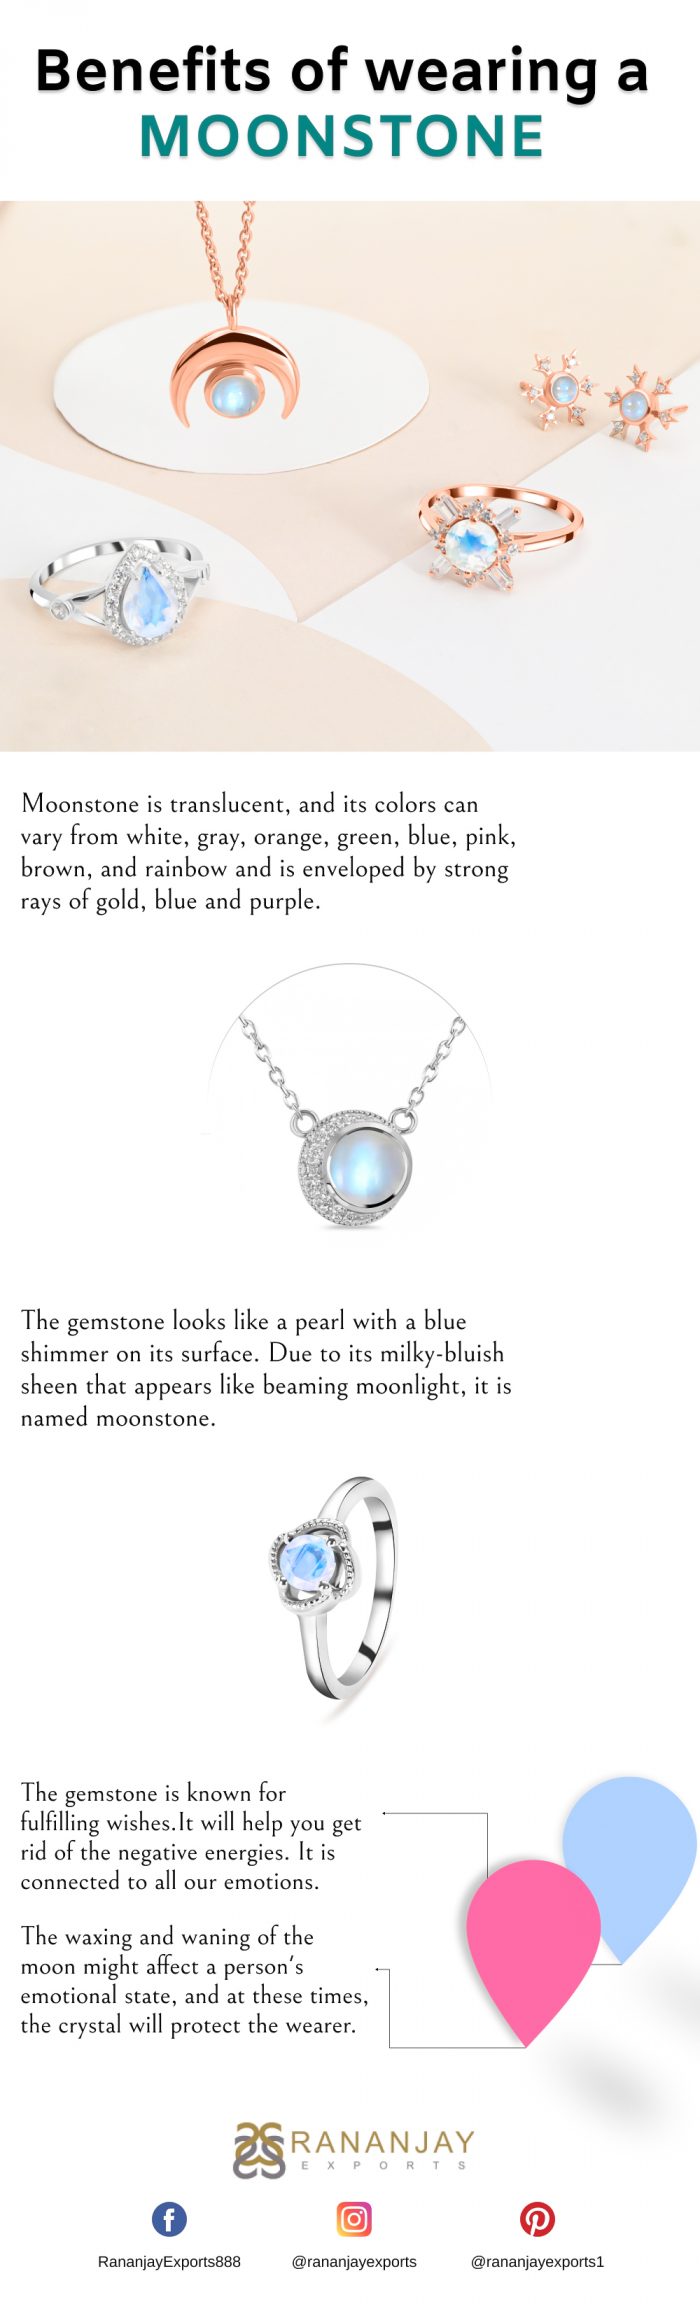 Benefits of Wearing a Moonstone